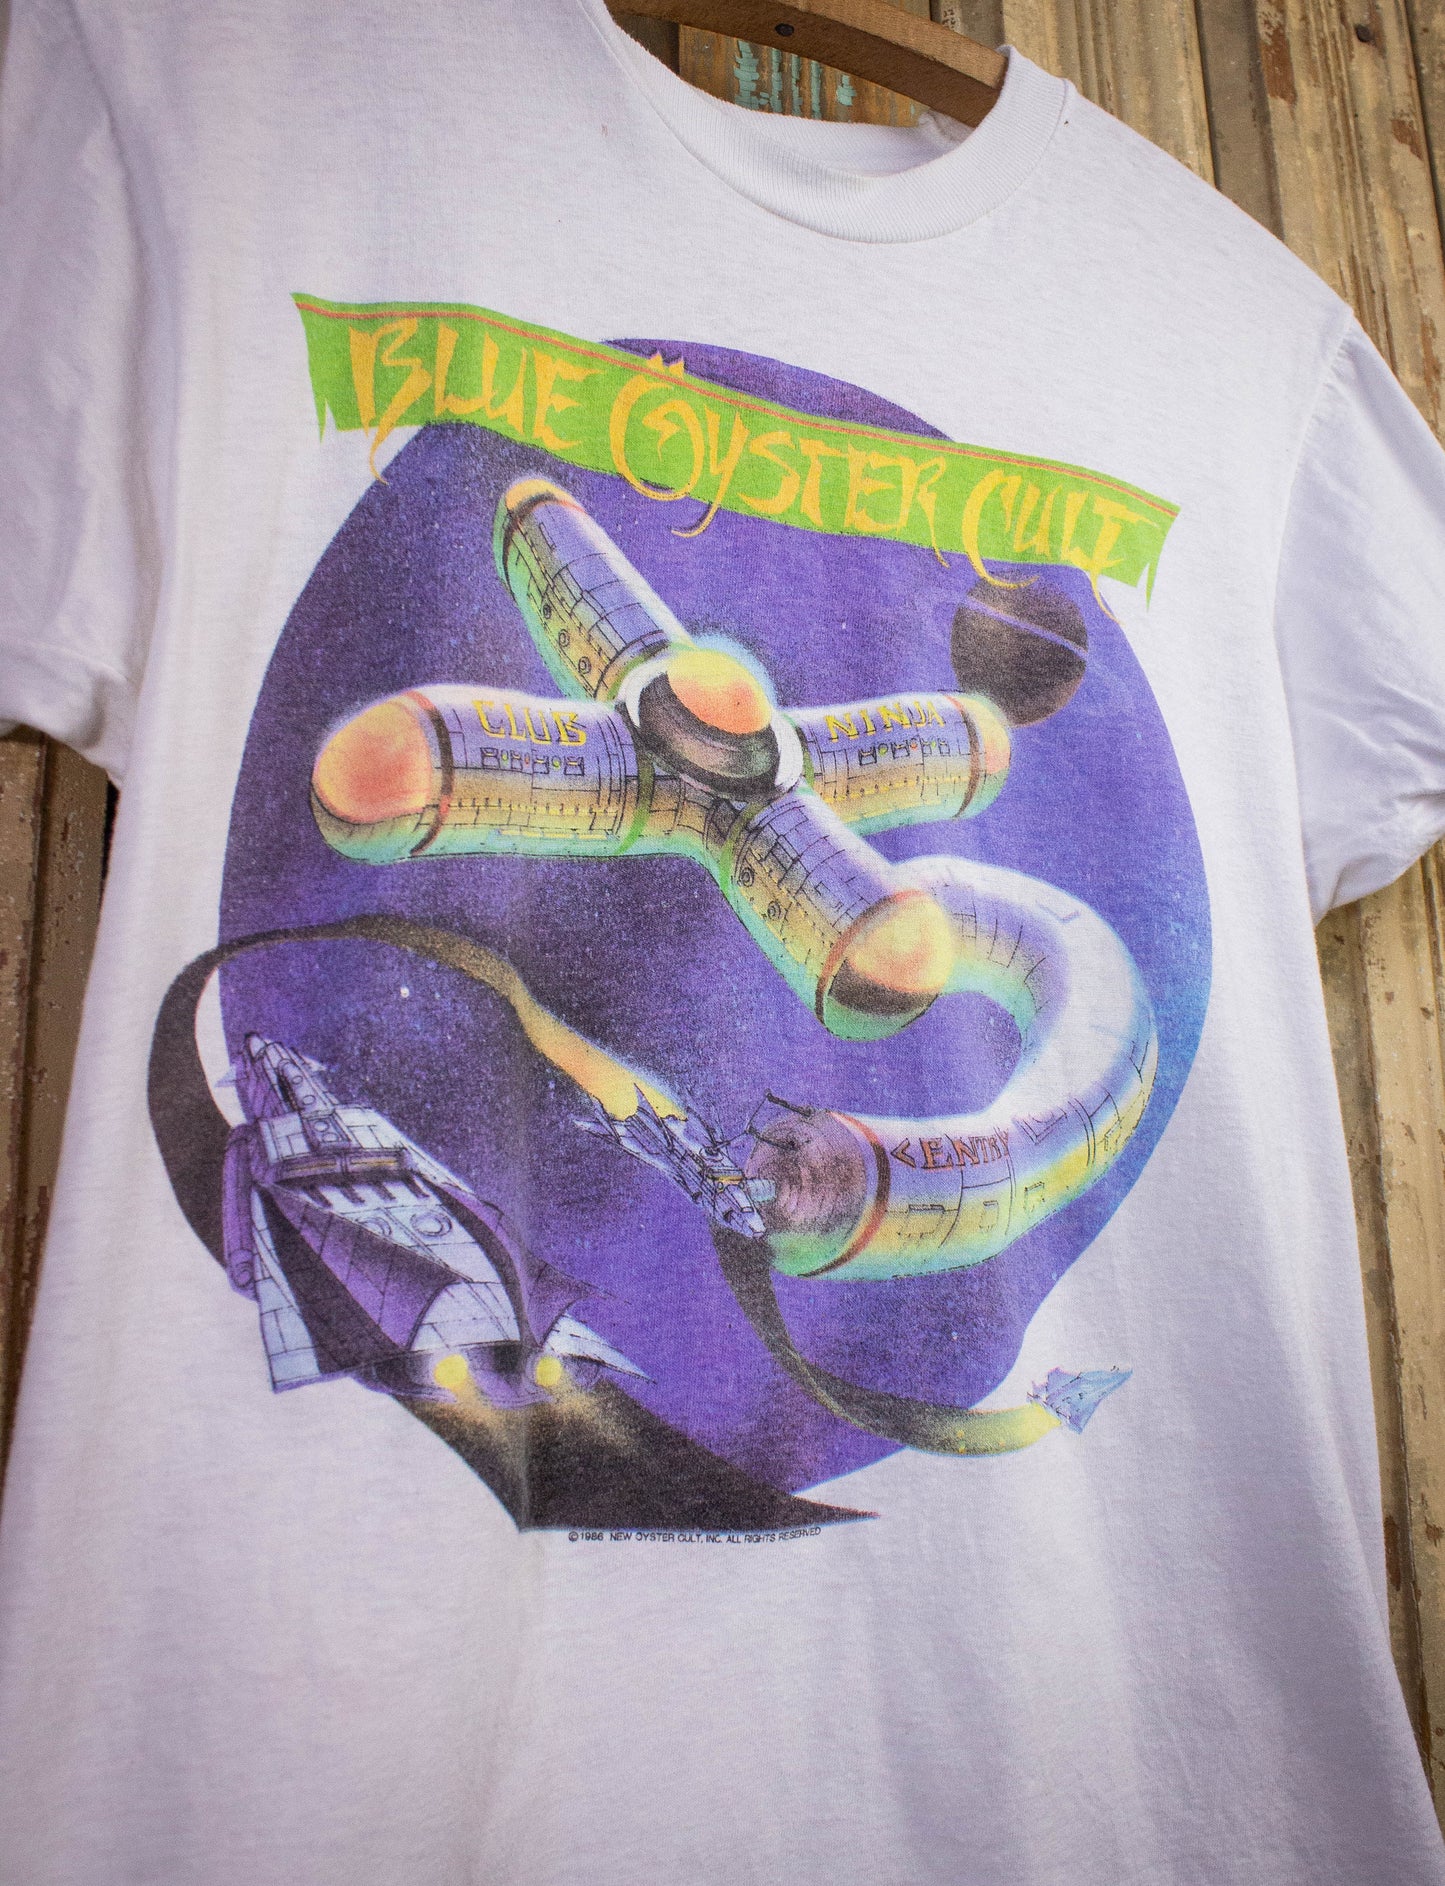 Vintage Blue Oyster Cult Club Ninja World Tour Concert T Shirt 1986 White Small